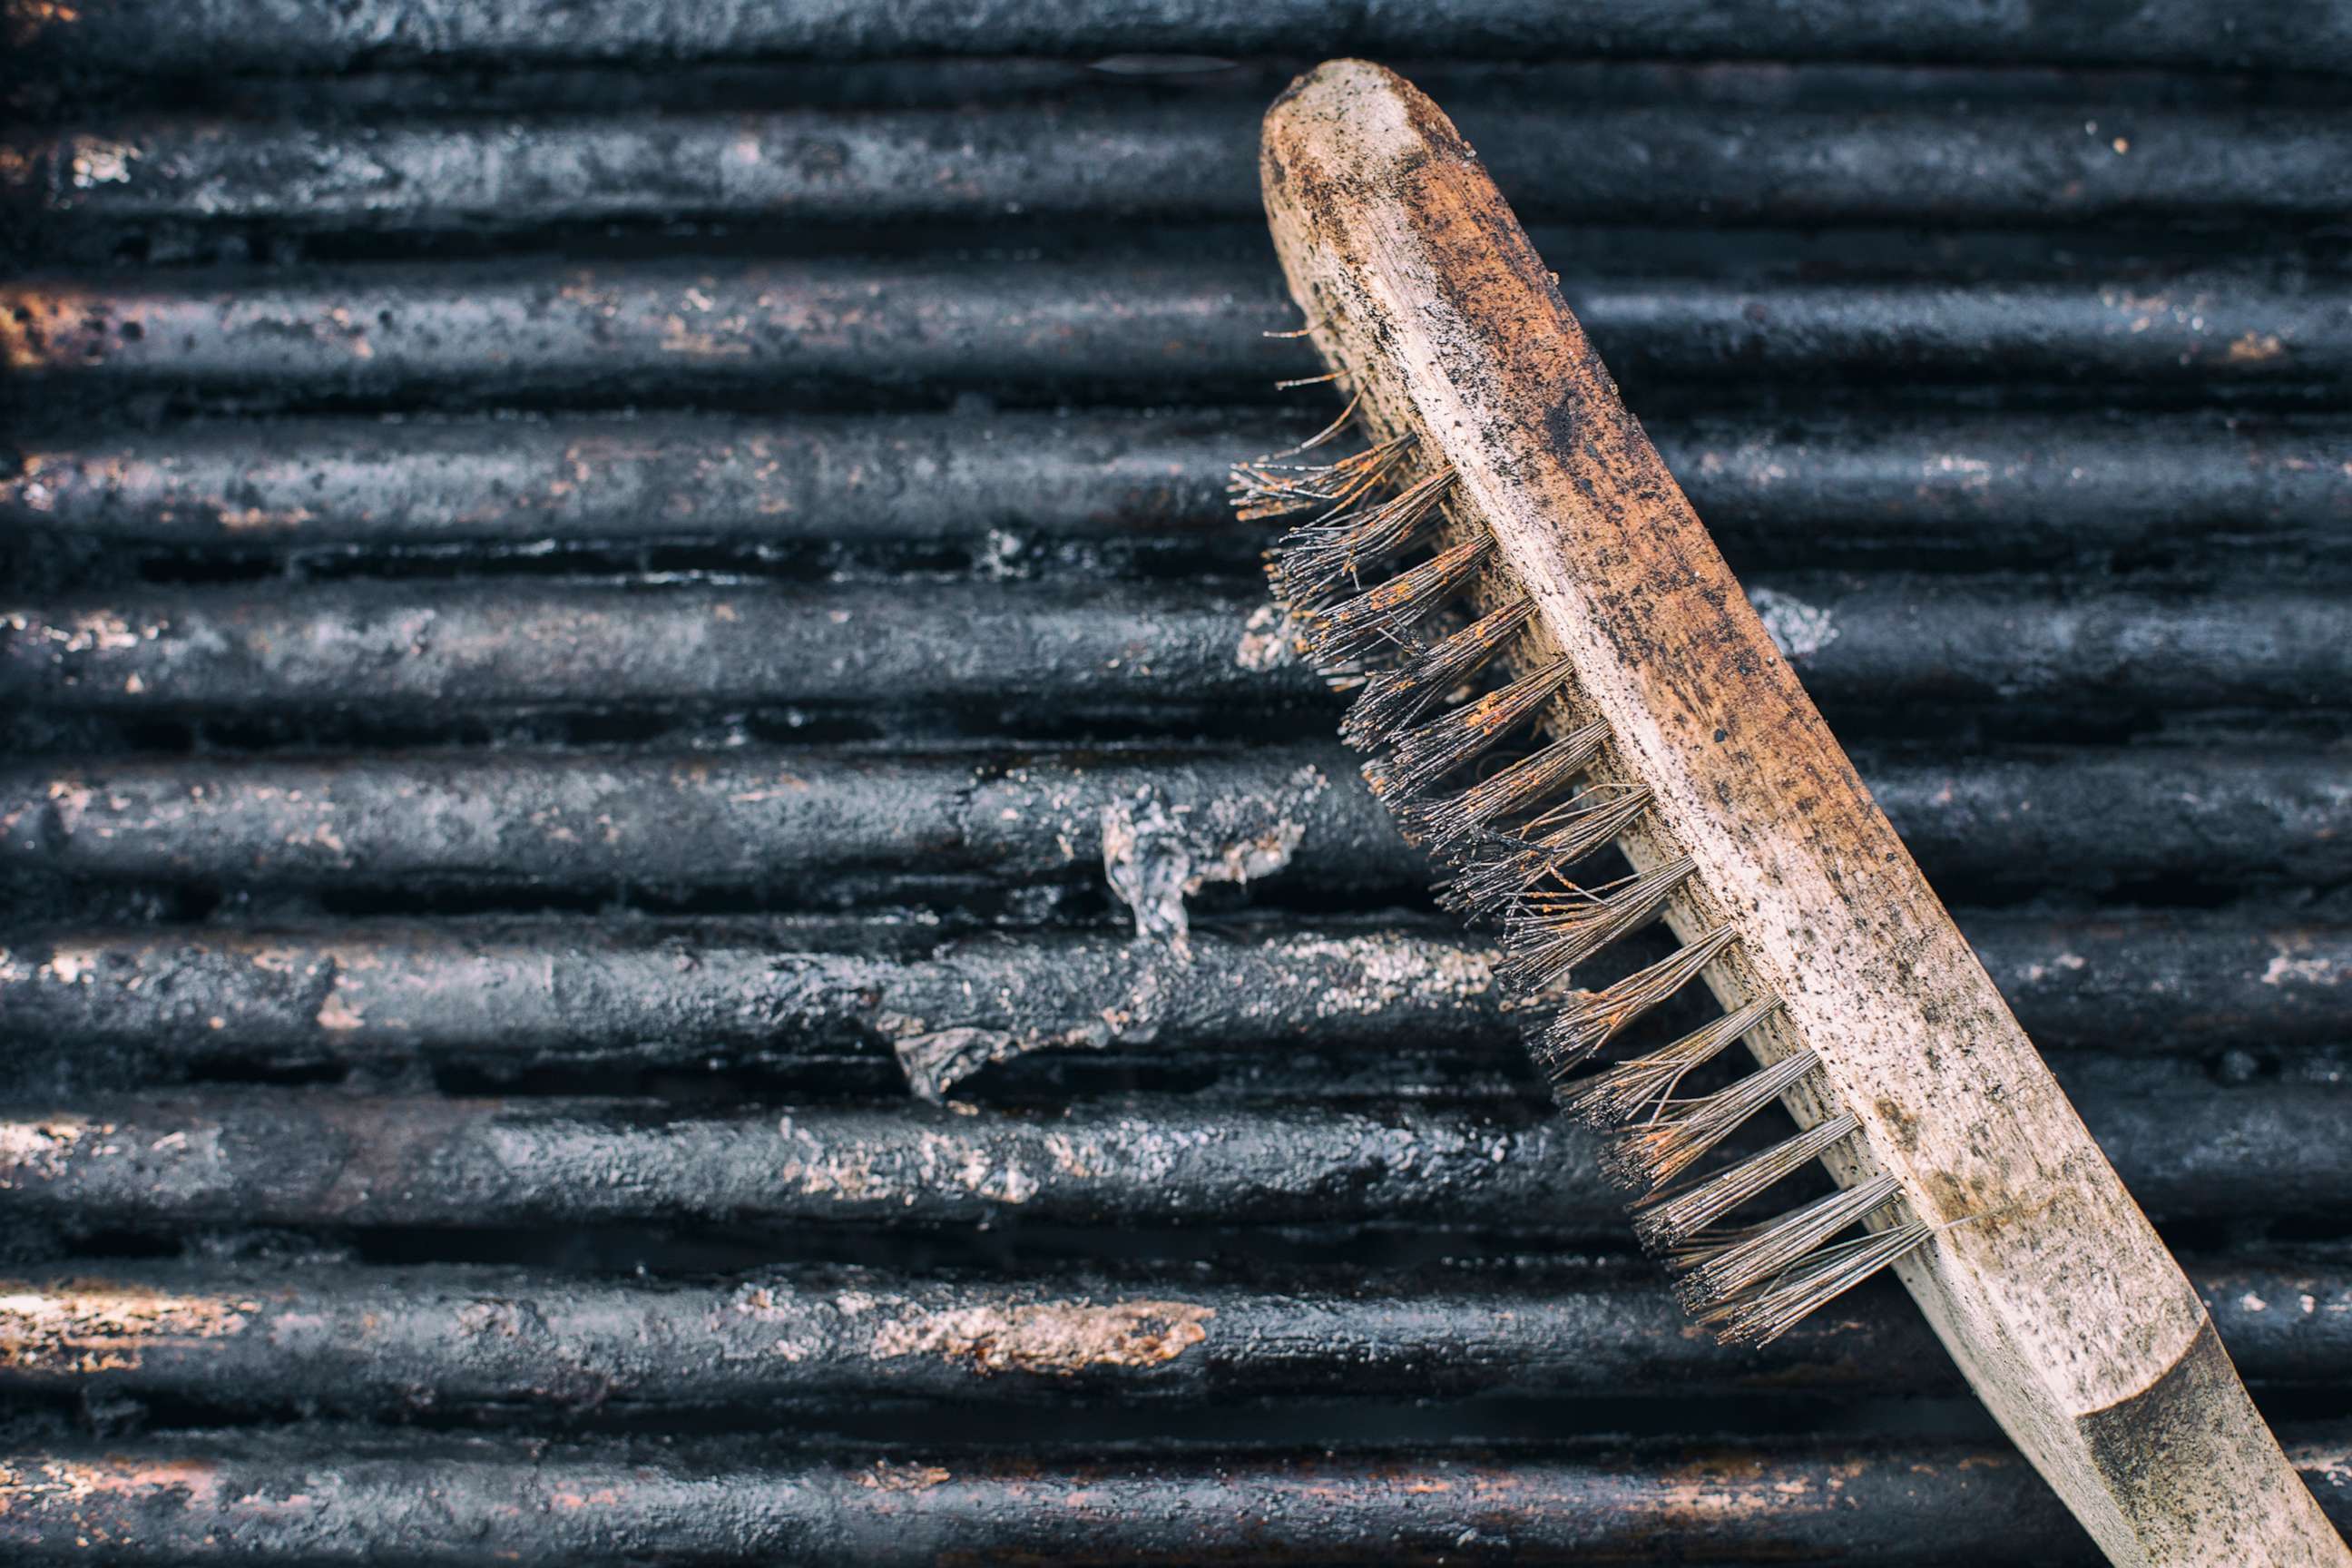 Wire-bristle grill brushes can cause injuries